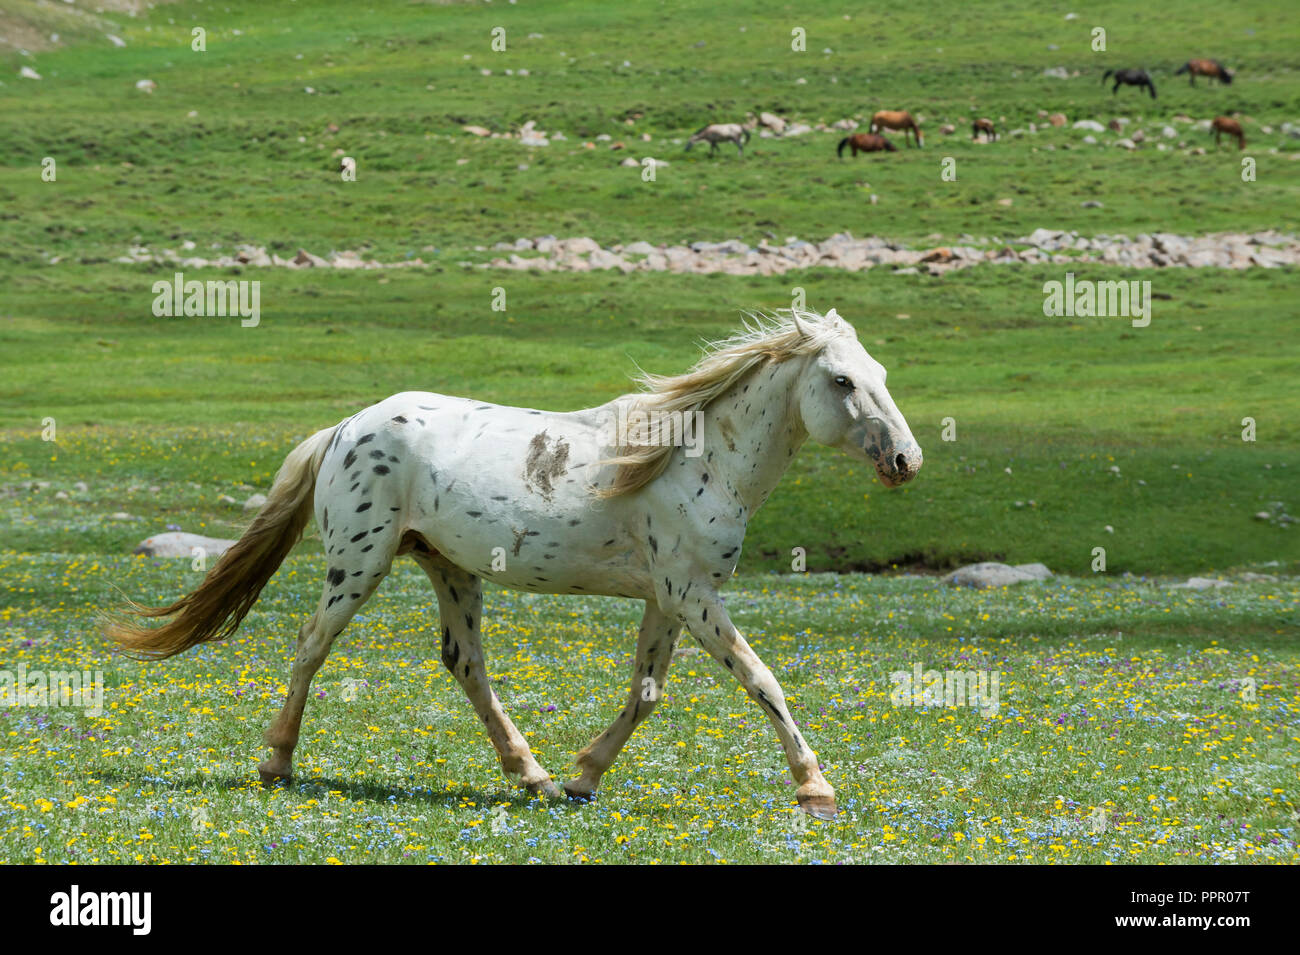 Horse running in the steppe, Song Kol Lake, Naryn province, Kyrgyzstan, Central Asia Stock Photo